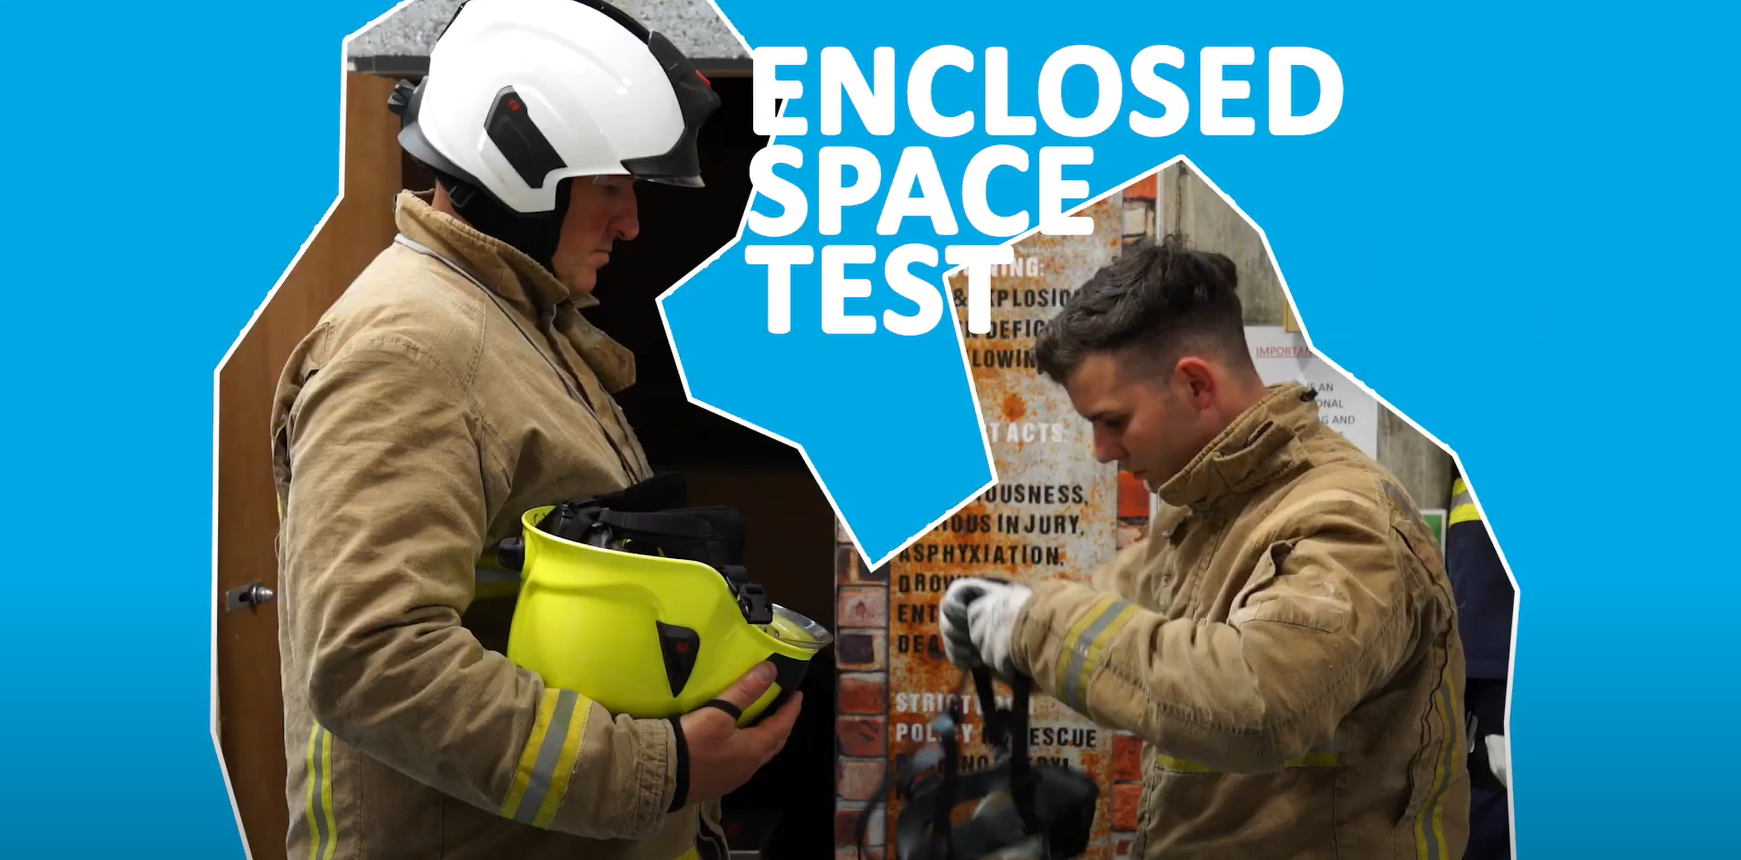 Enclosed Space test